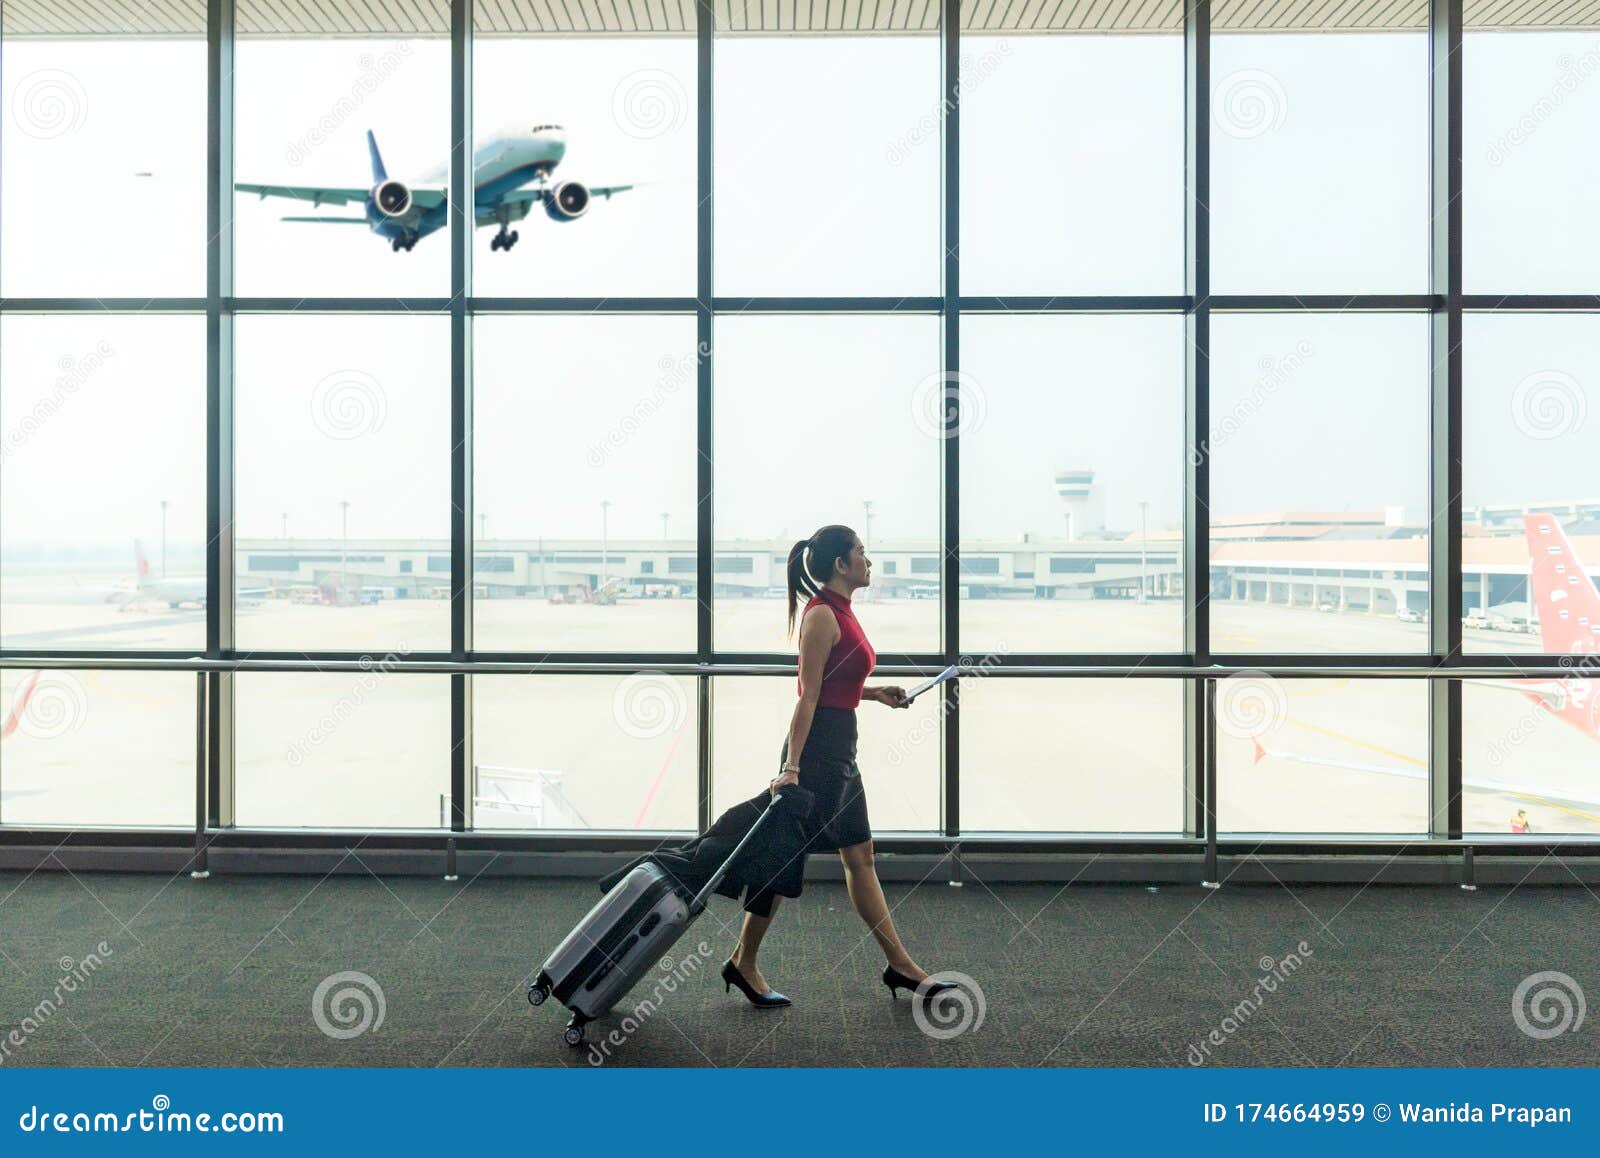 Airport Background. Business Woman Planning Work and Meeting Trip Checking  Board Pass at the Airport Glass Window Stock Image - Image of corporate,  airline: 174664959